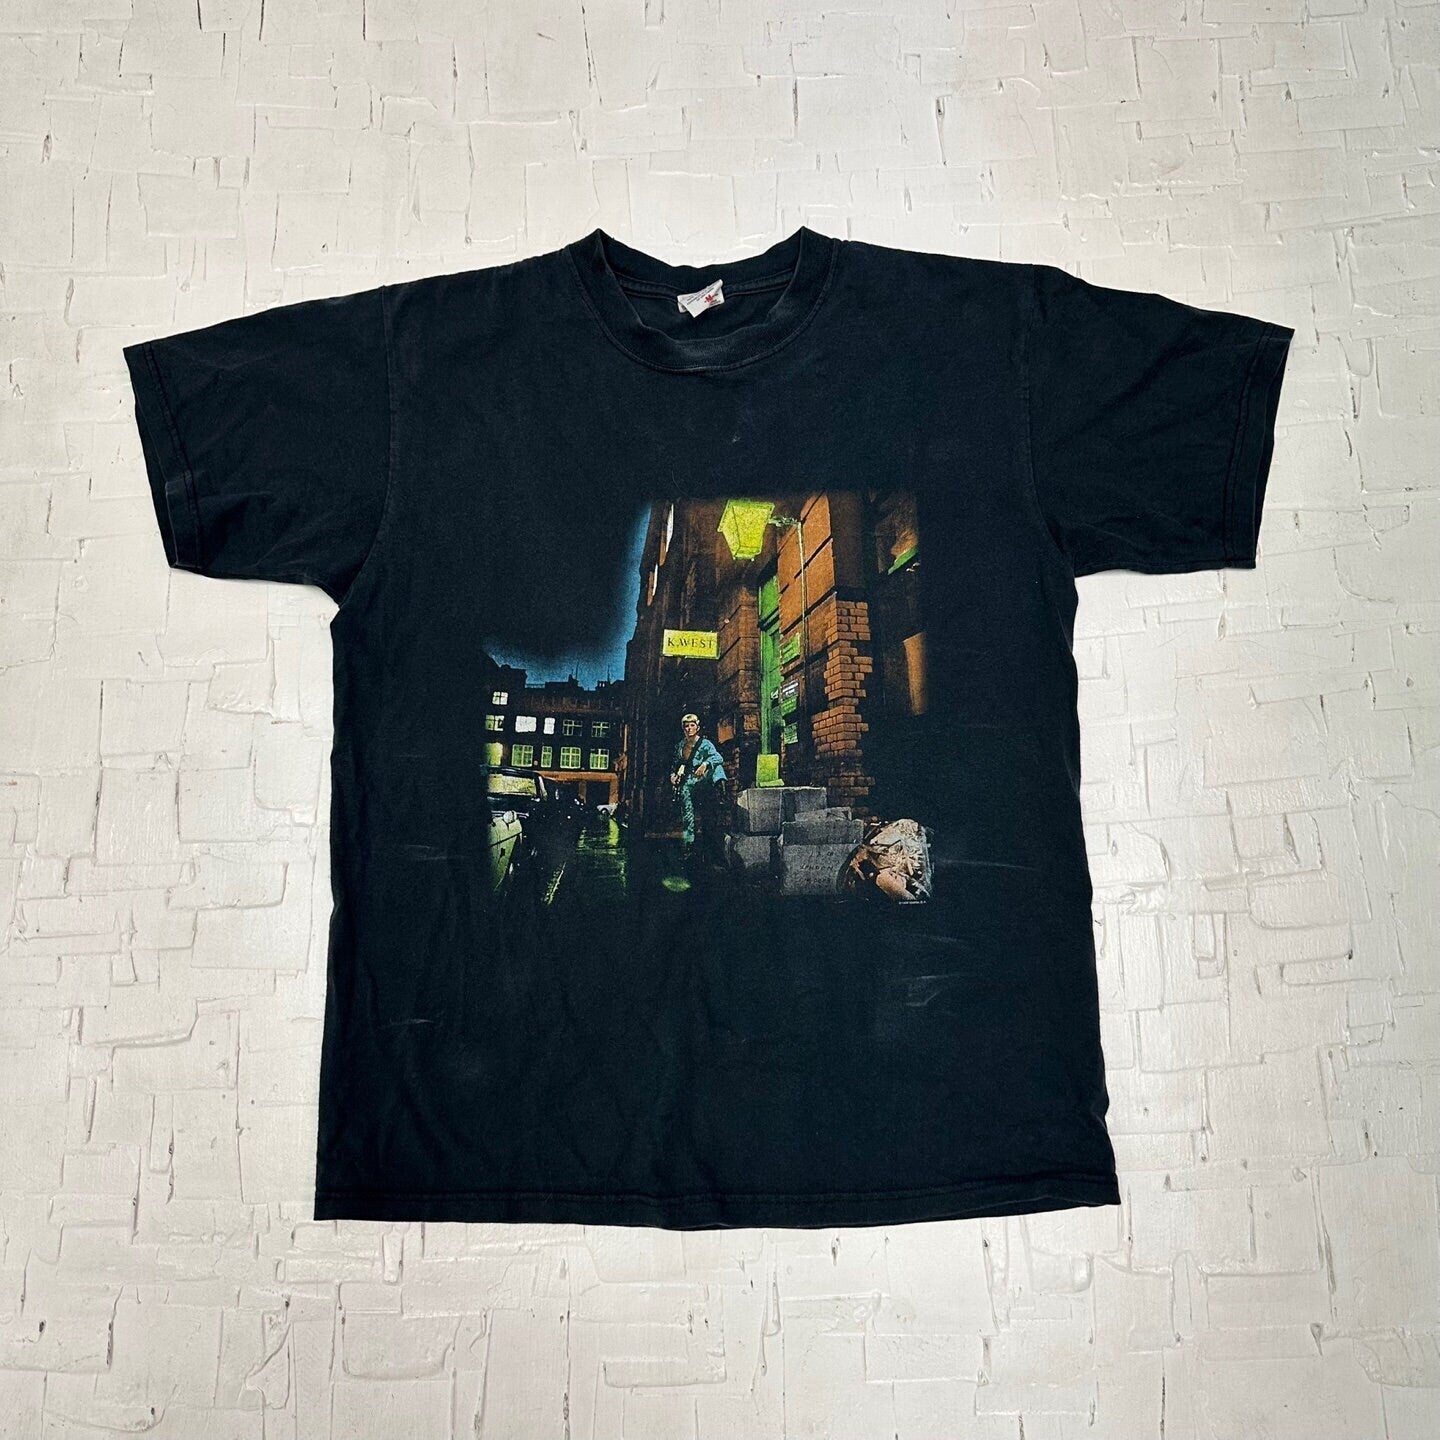 1998 Vintage David Bowe The Rise and Fall of Ziggy Stardust and the Spiders from Mars T-Shirt | Vintage T-Shirt | Size M | SKU M-2073 |